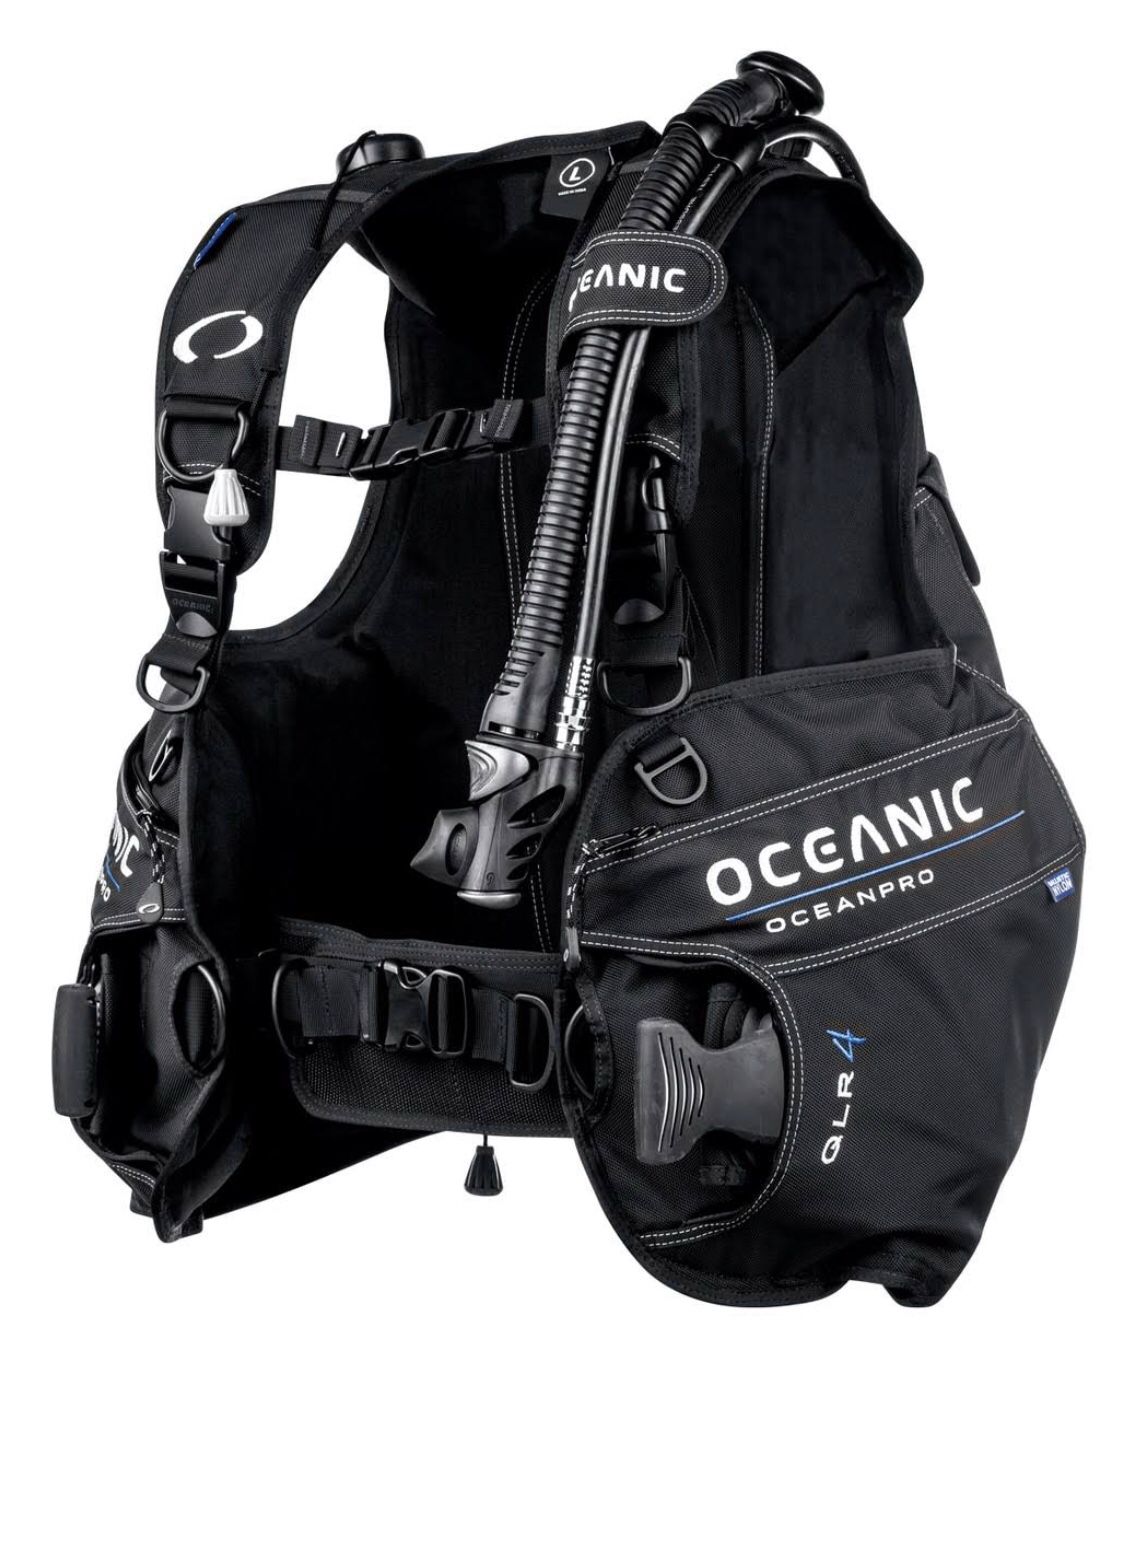 NEW/UNUSED XL Oceanic OceanPro BCD for sale